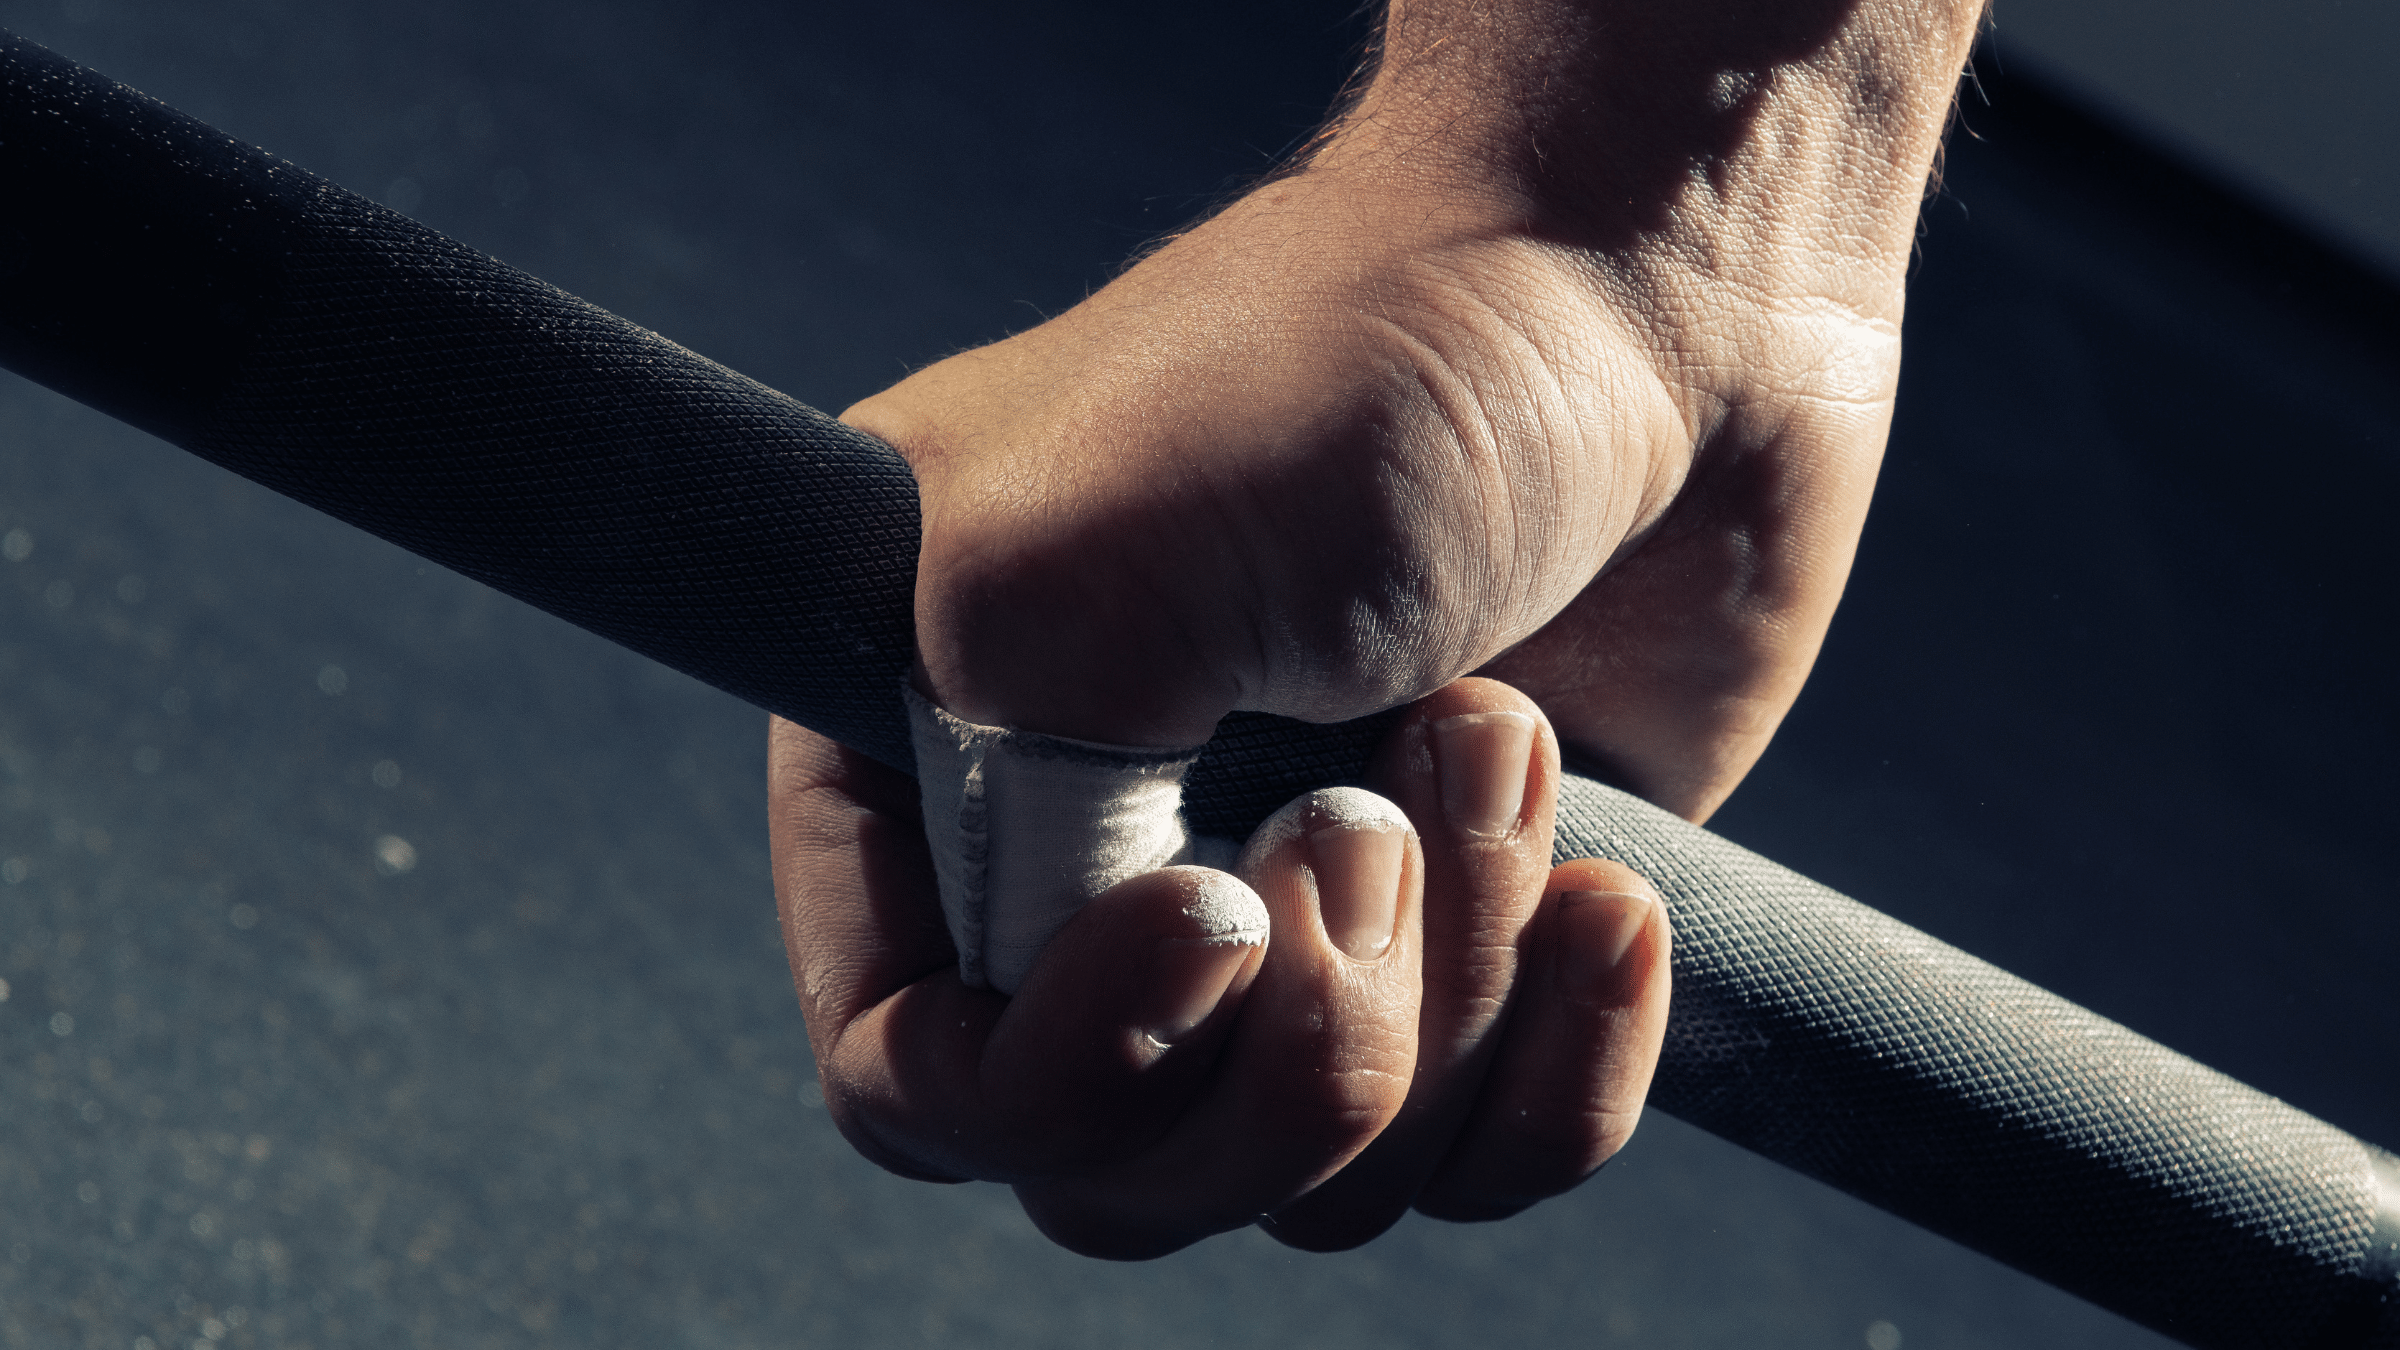 The Evidence-Based Guide to Grip Strength Training & Forearm